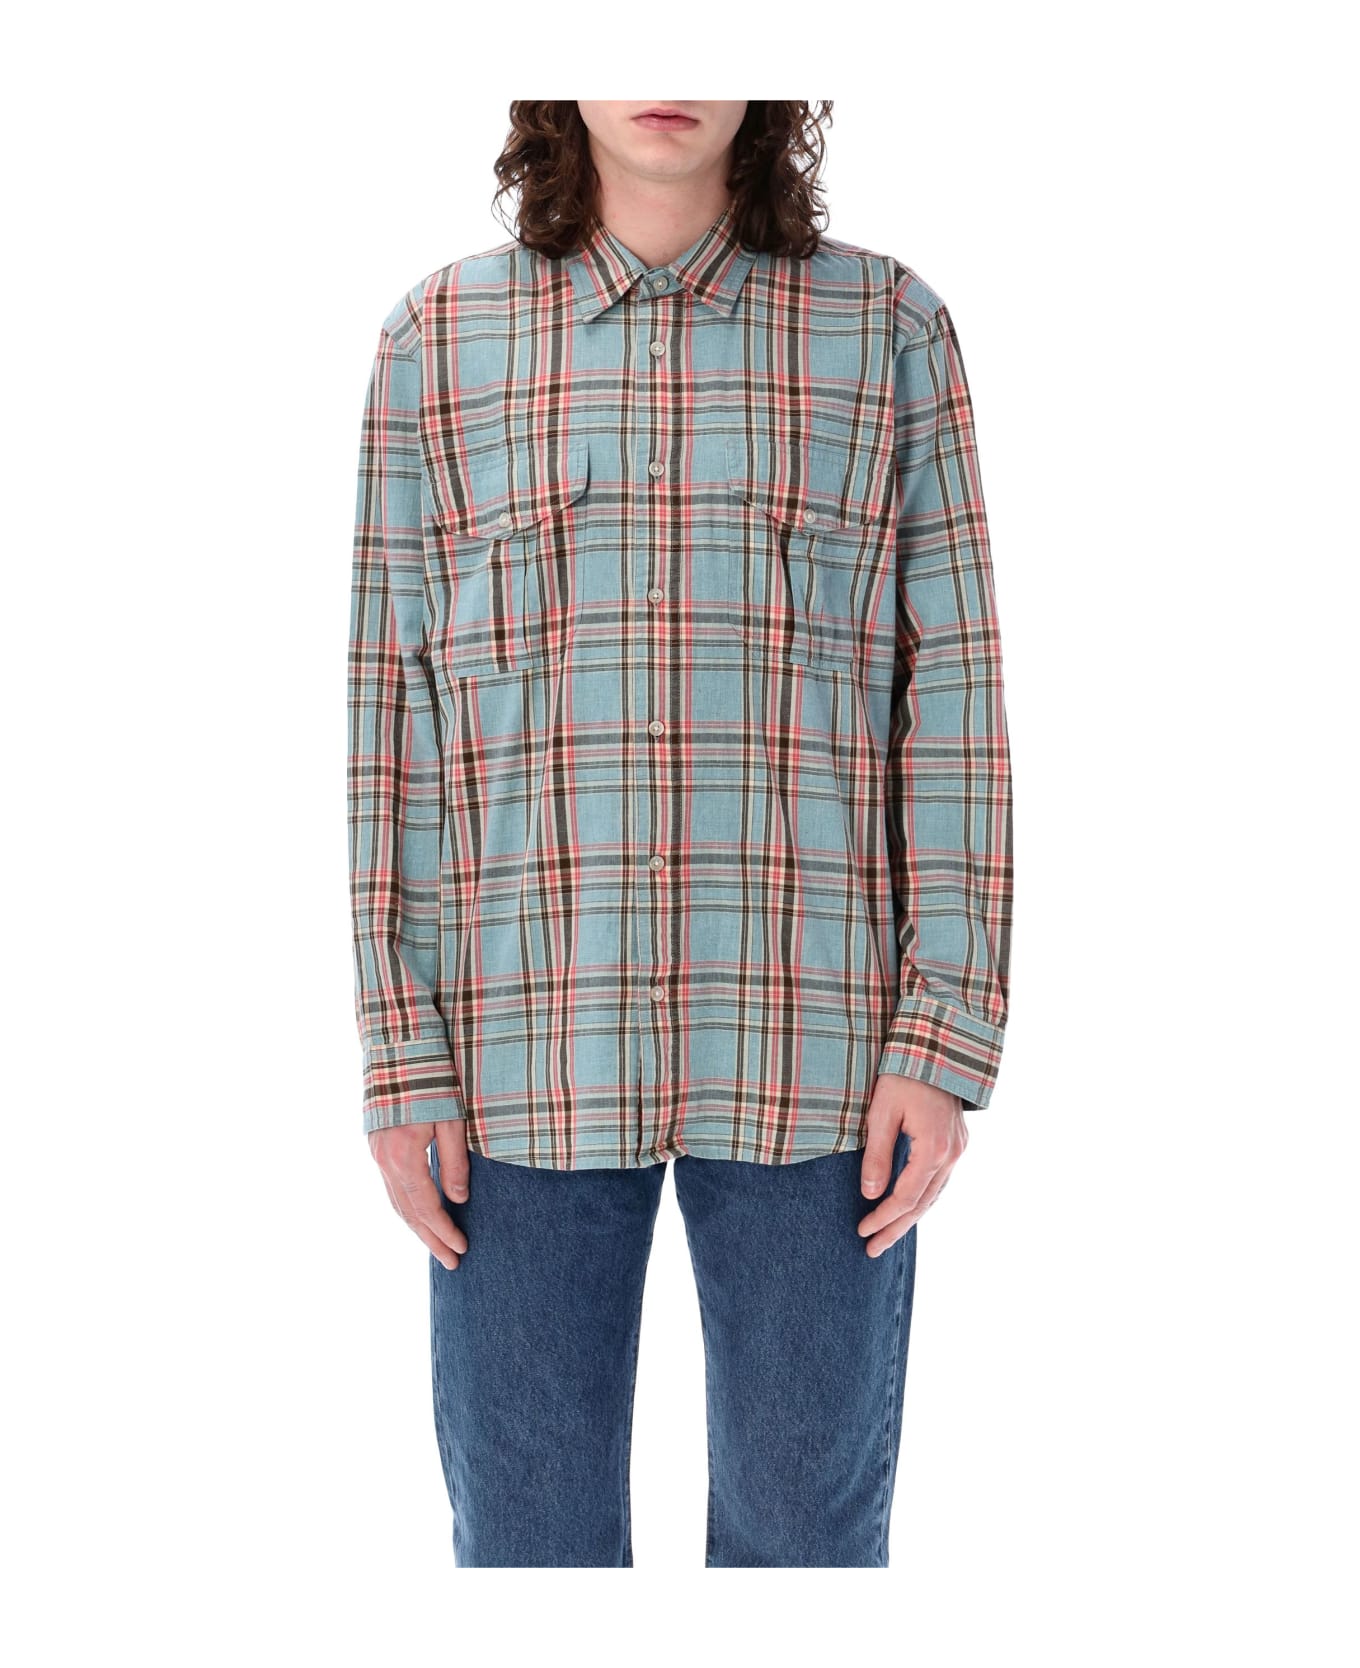 Filson Washed Feather Cloth Shirt - LIGHT BLUE CHECK